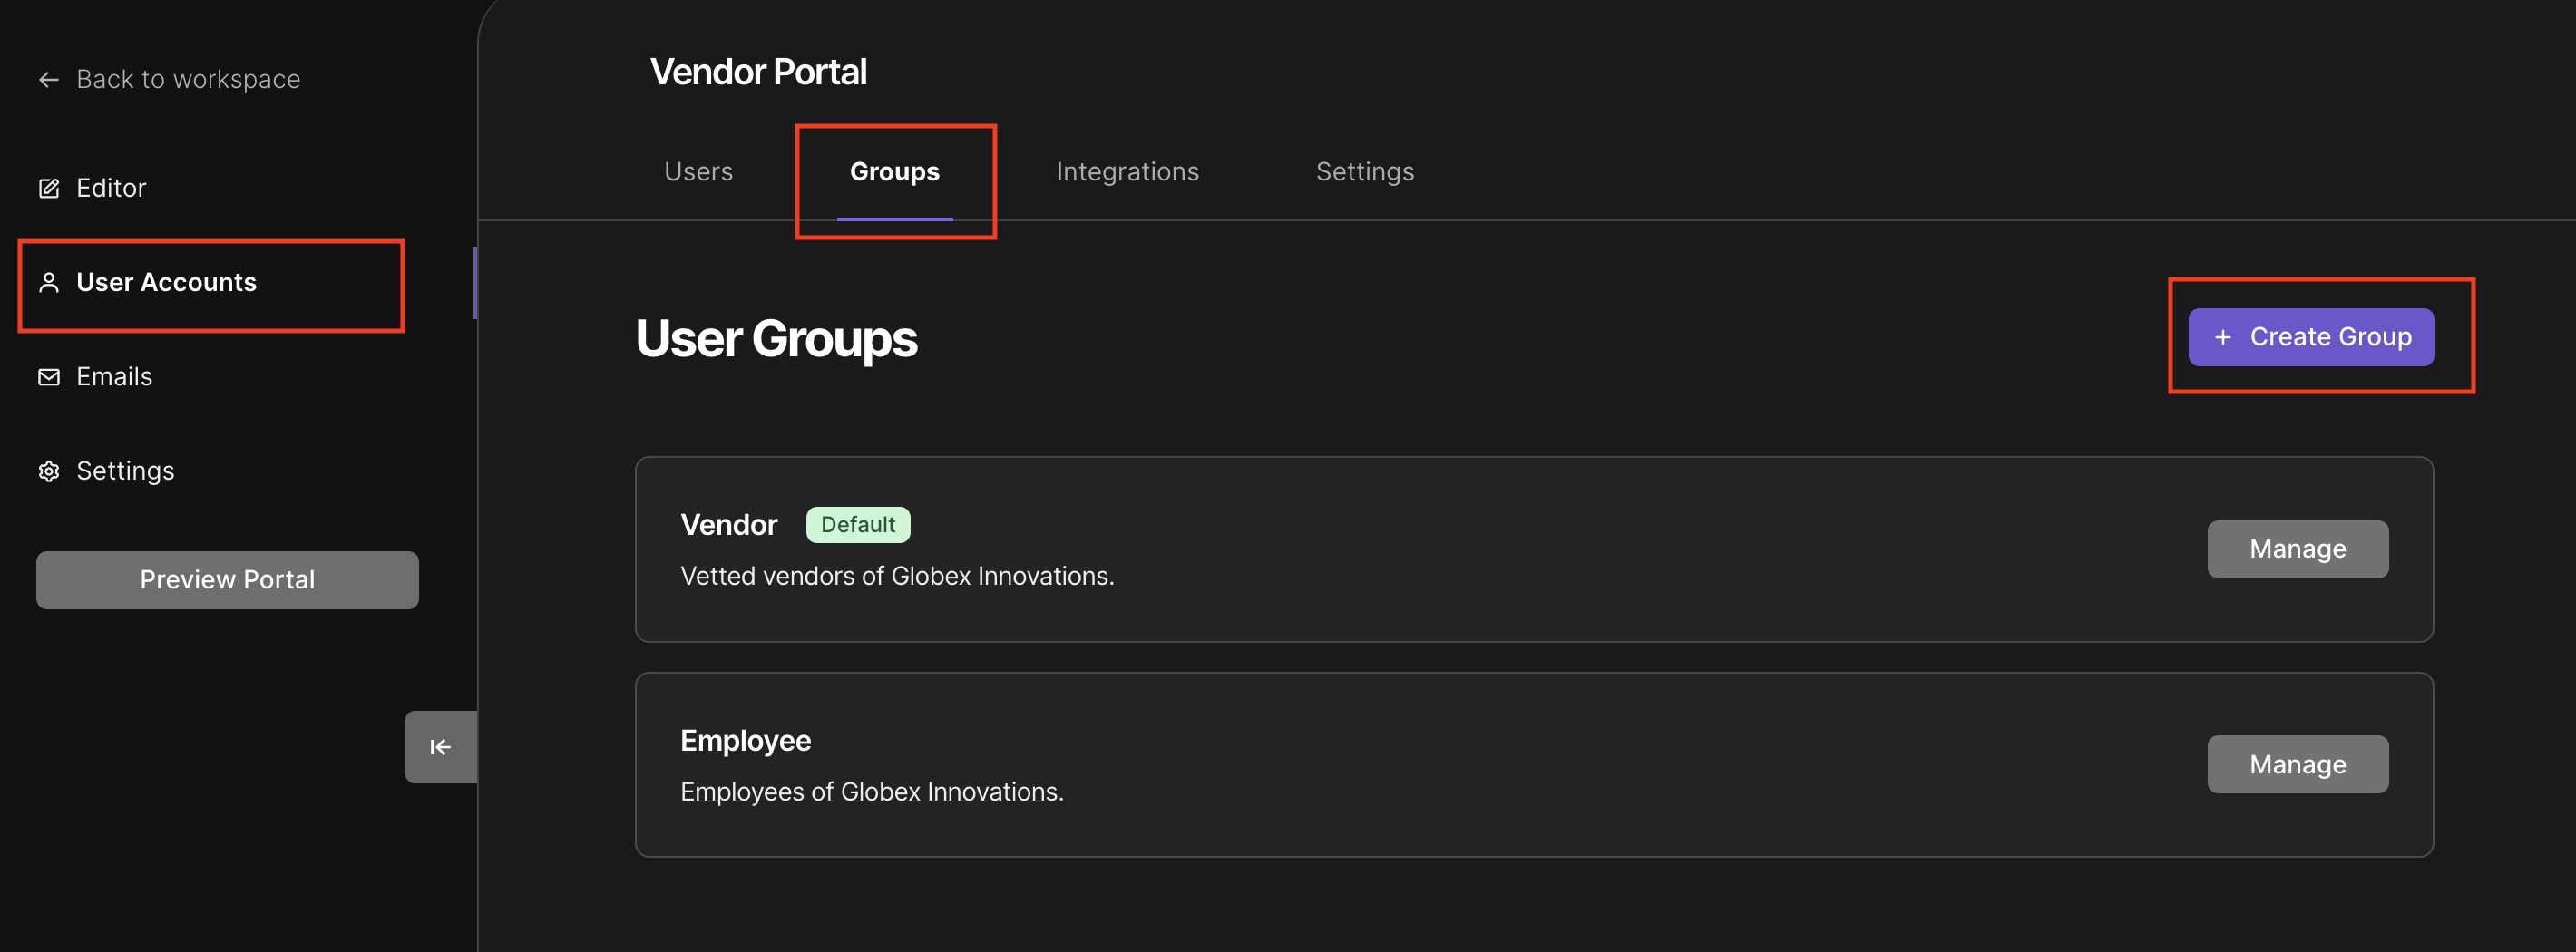 Groups overview